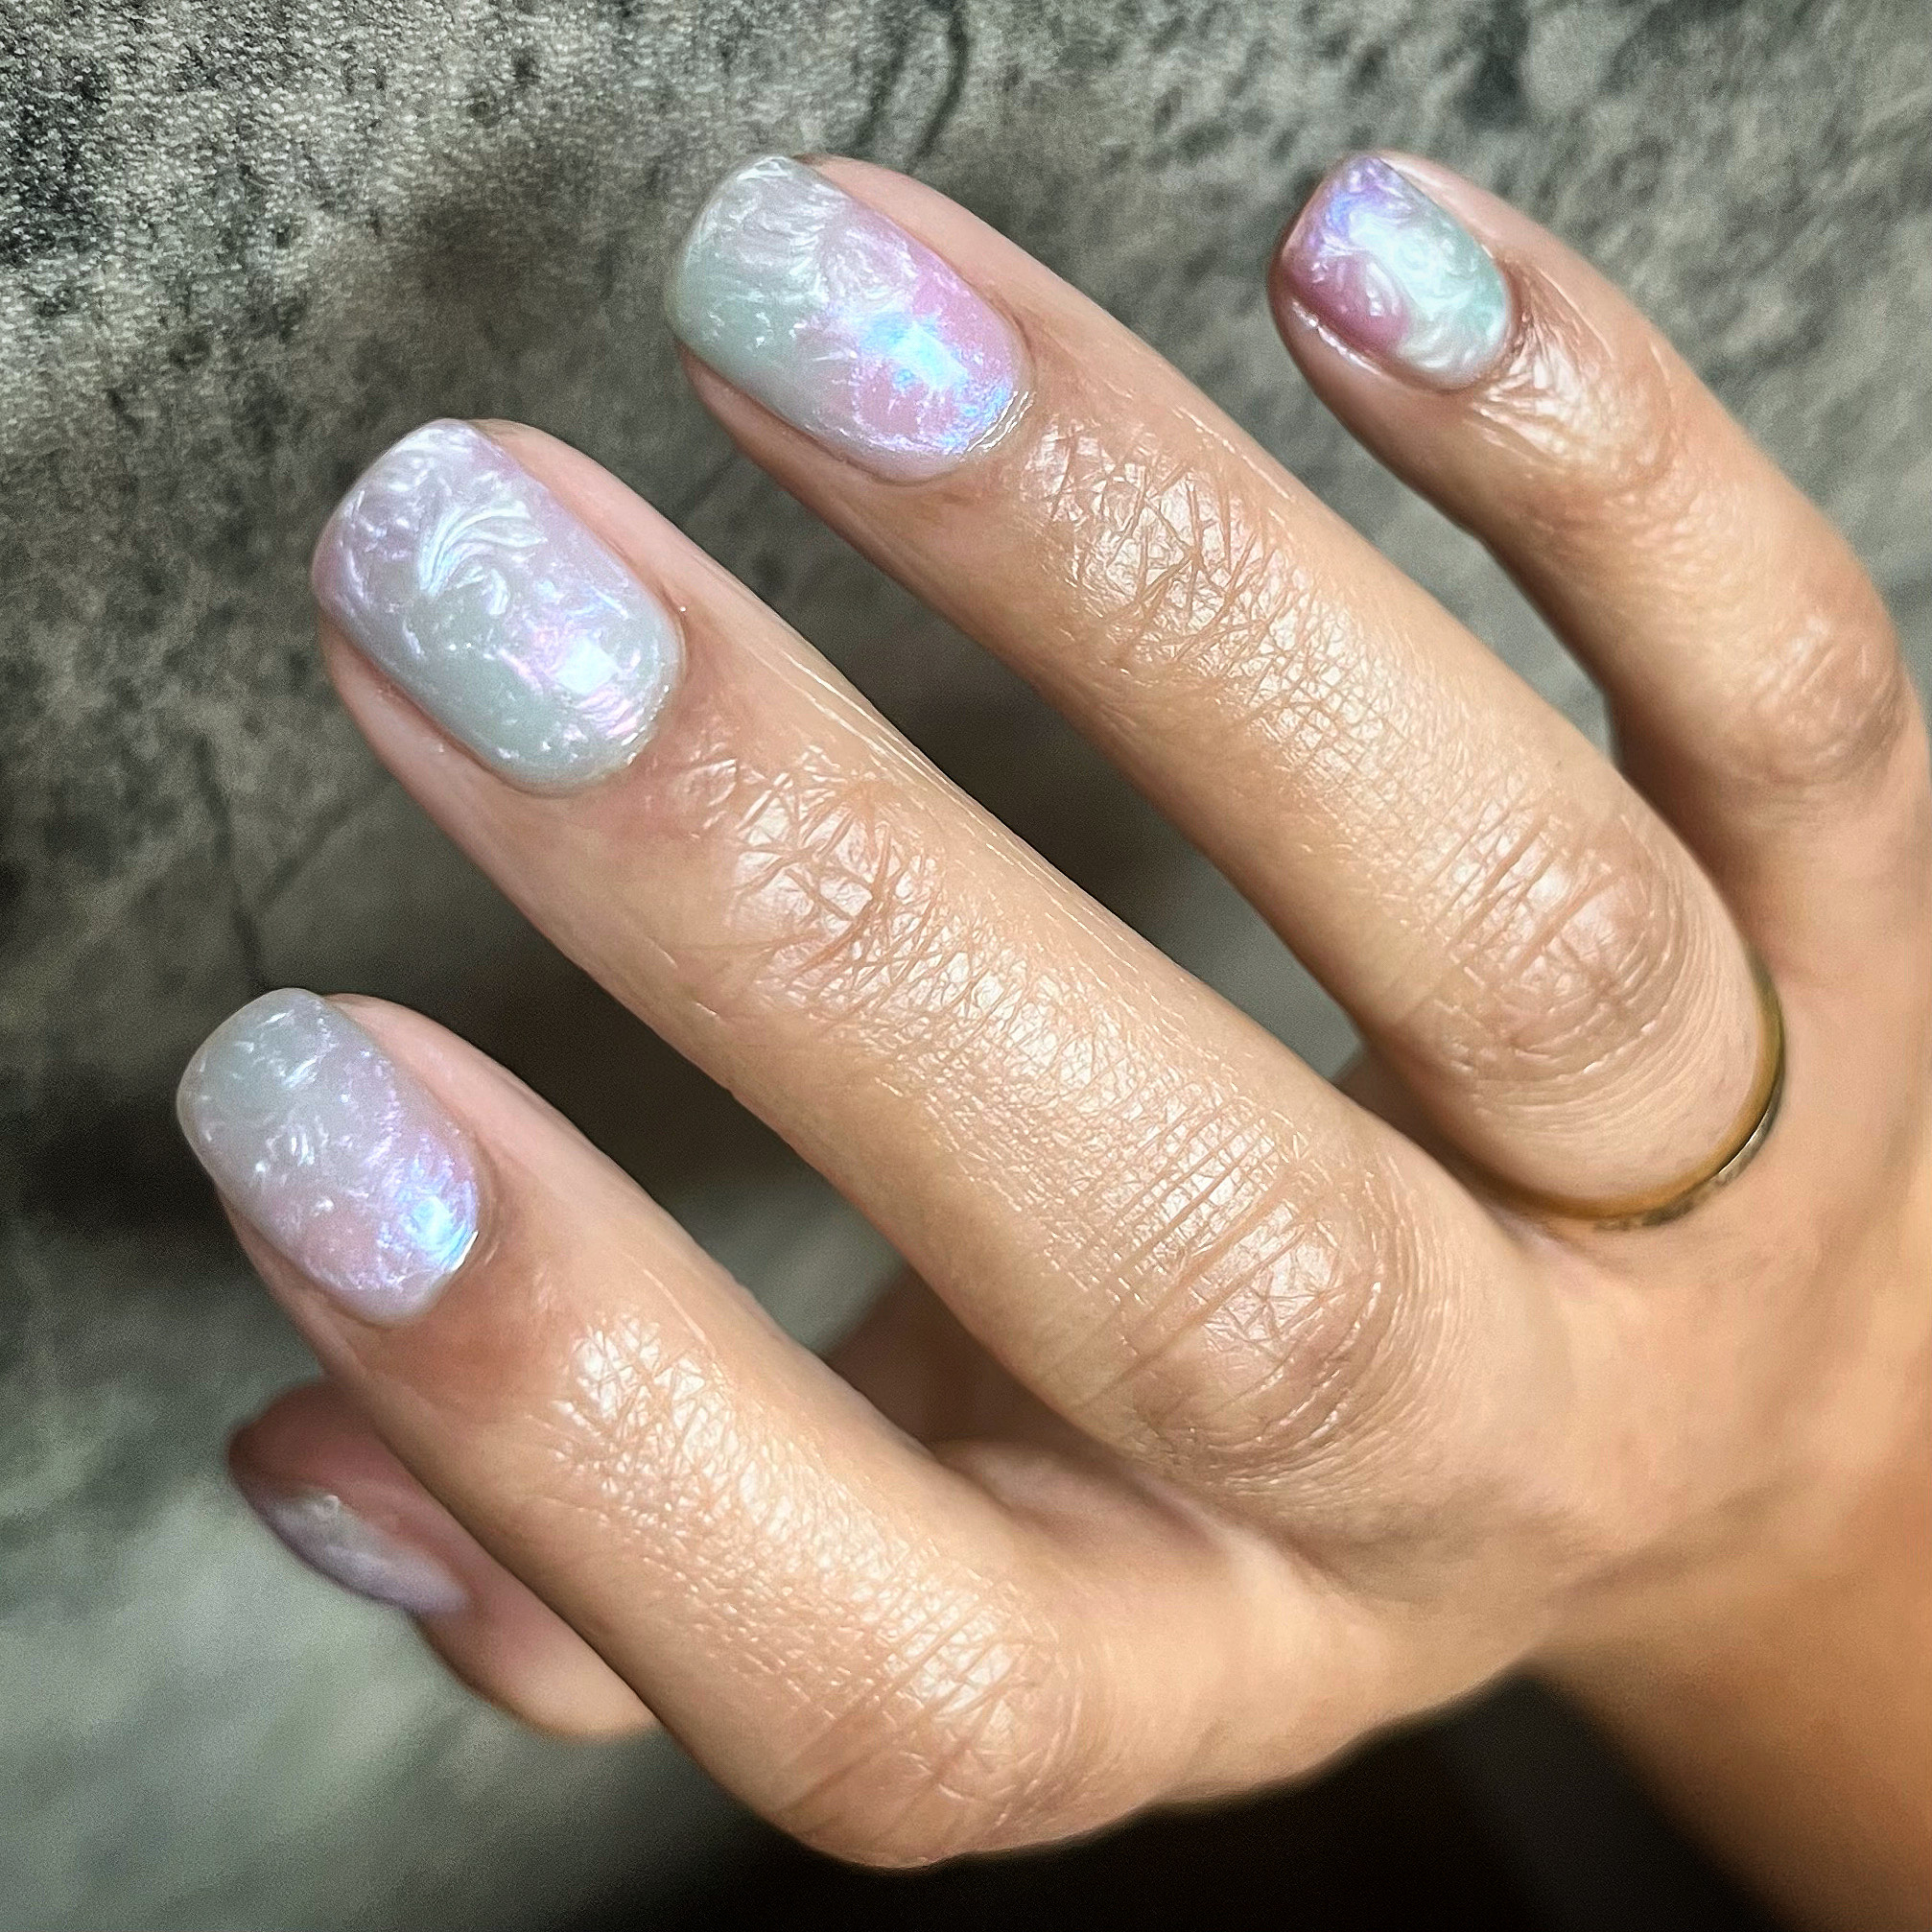 Hand sporting iridescent manicured nails with a subtle sheen, showcasing a ring on the ring finger